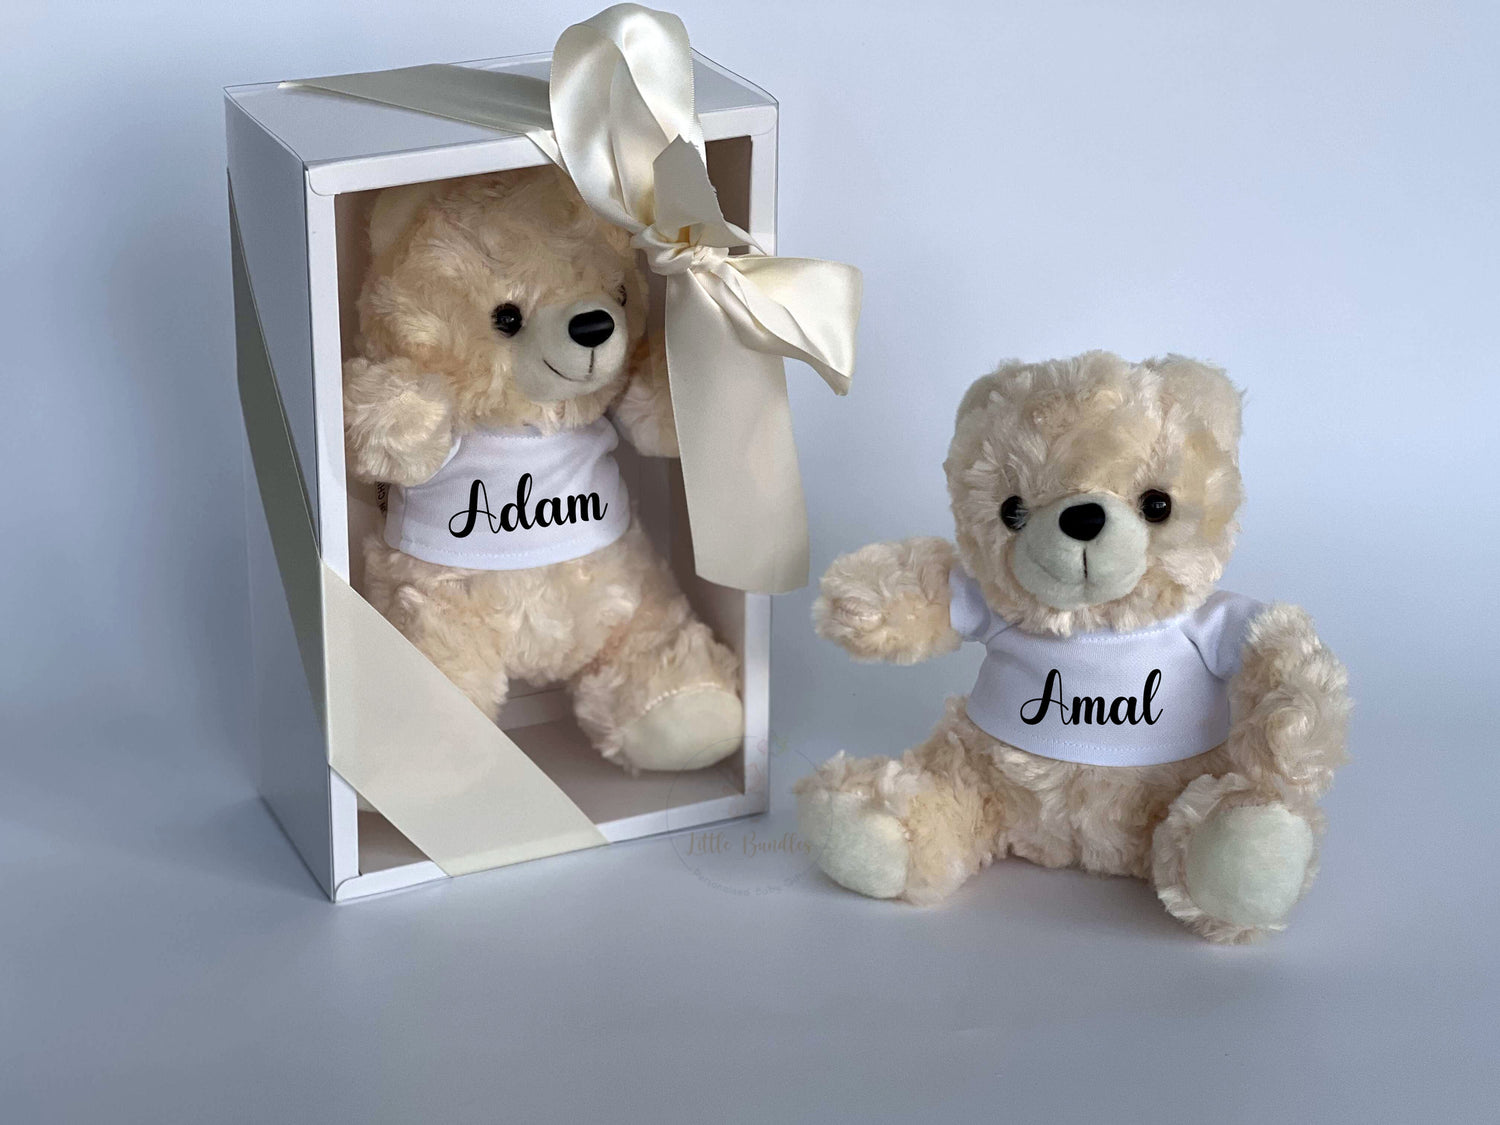 2 plush teddy bears with name personalisation boxed and unboxed